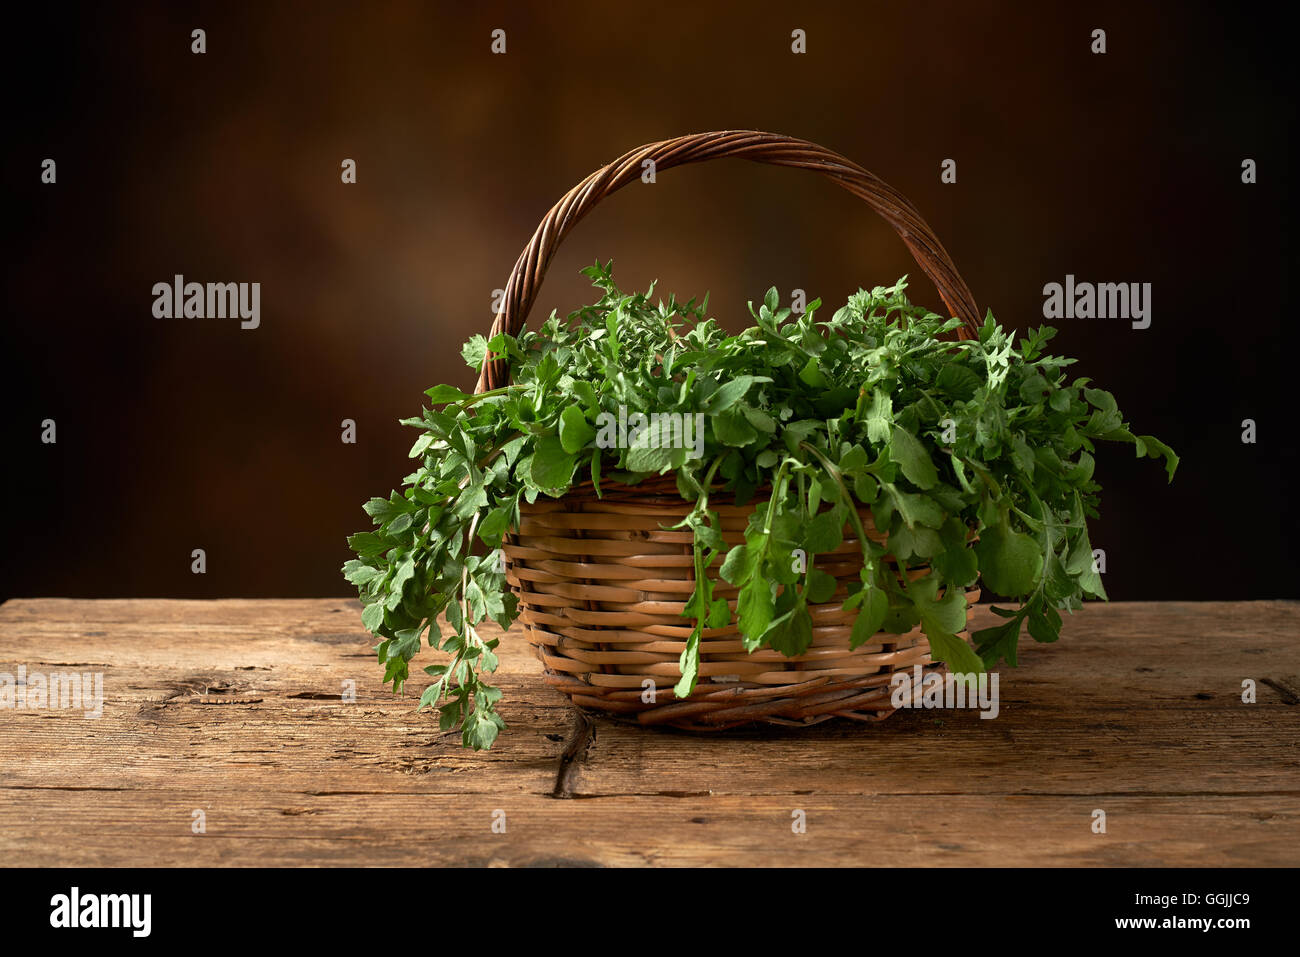 fresh green leafy vegetable on a wooden kitchen bench. Stock Photo